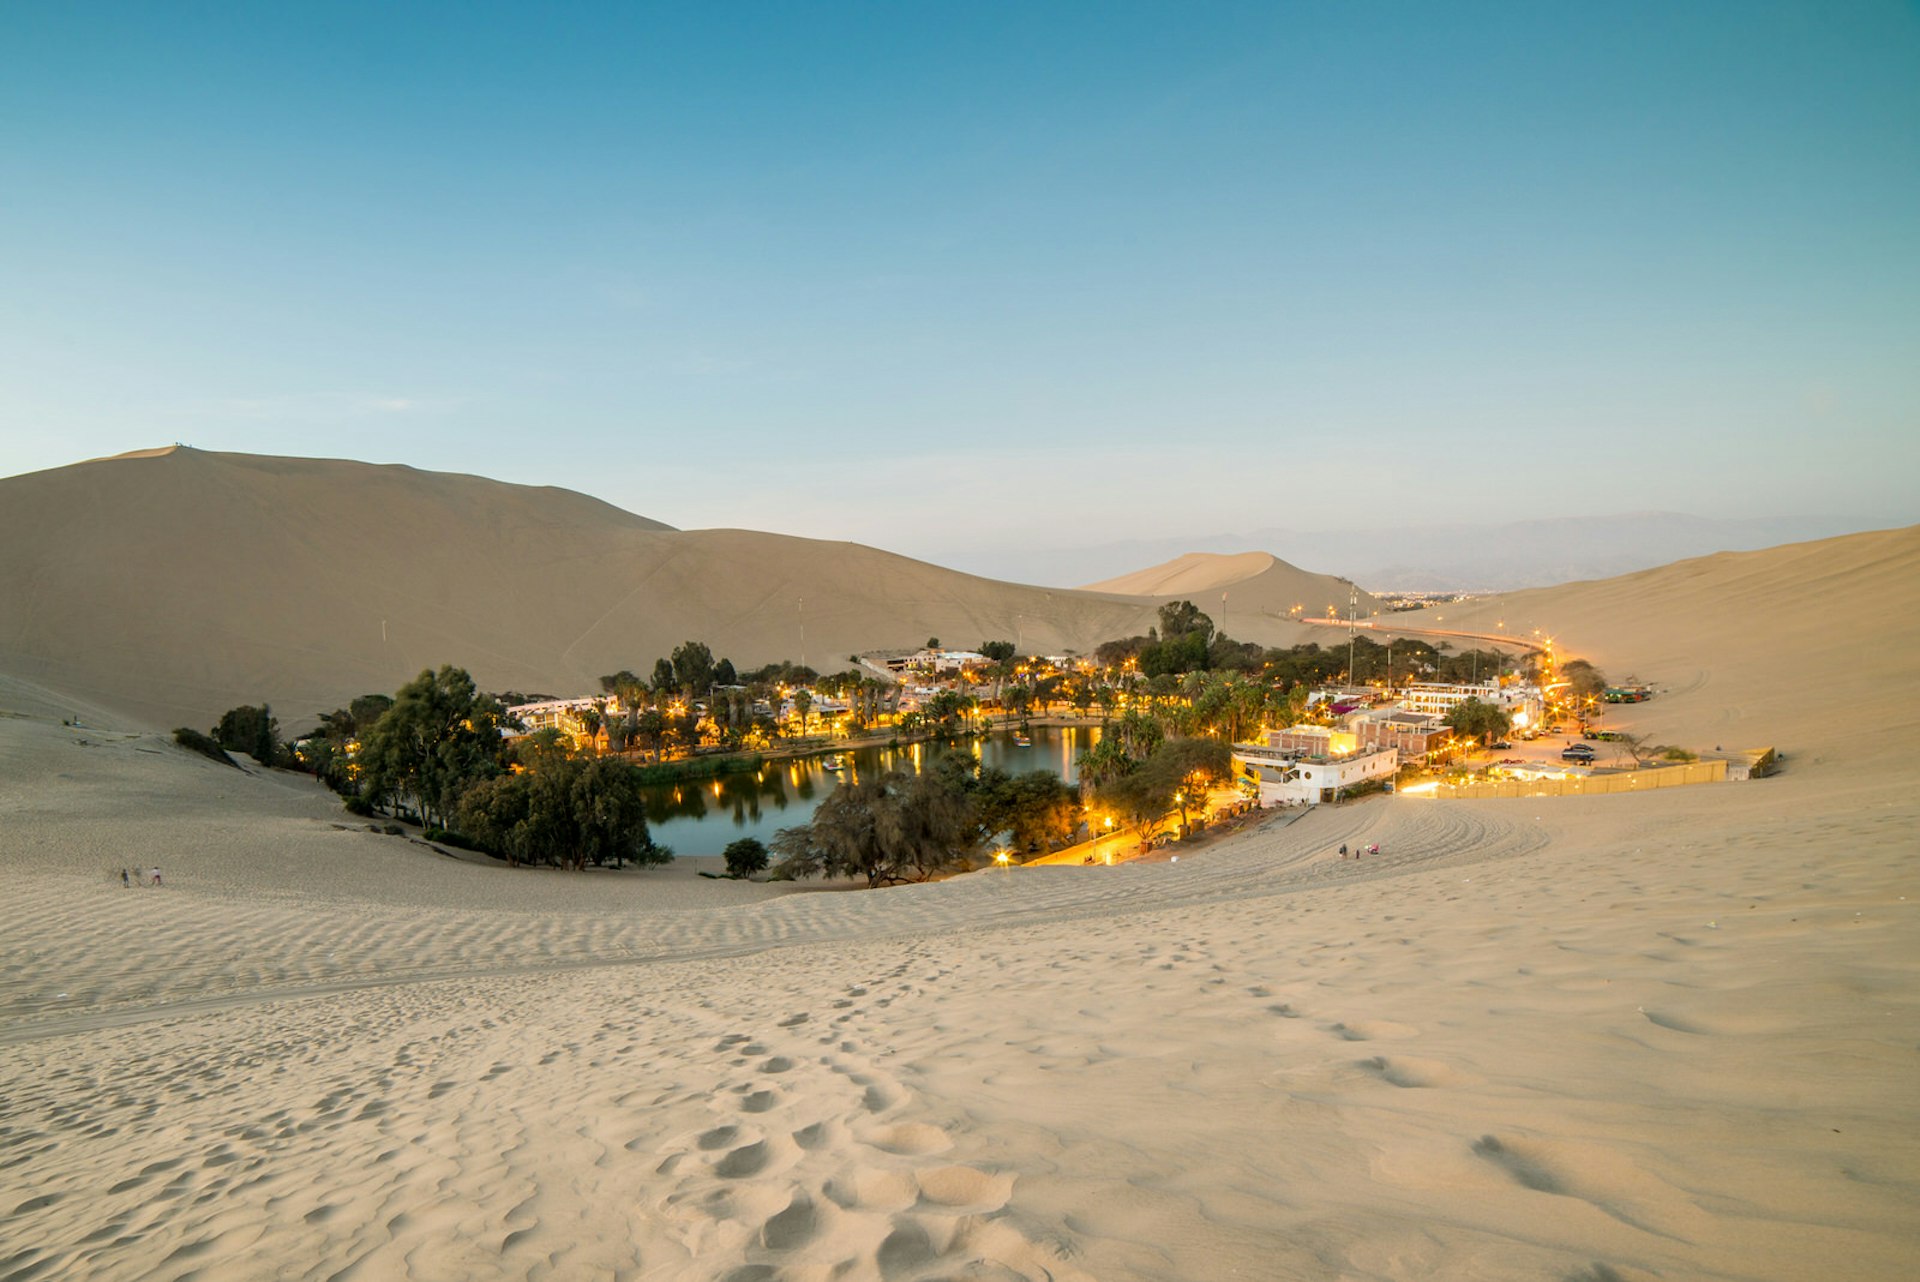 Huacachina village, a desert oasis in Peru © Andrew Clifforth / Shutterstock